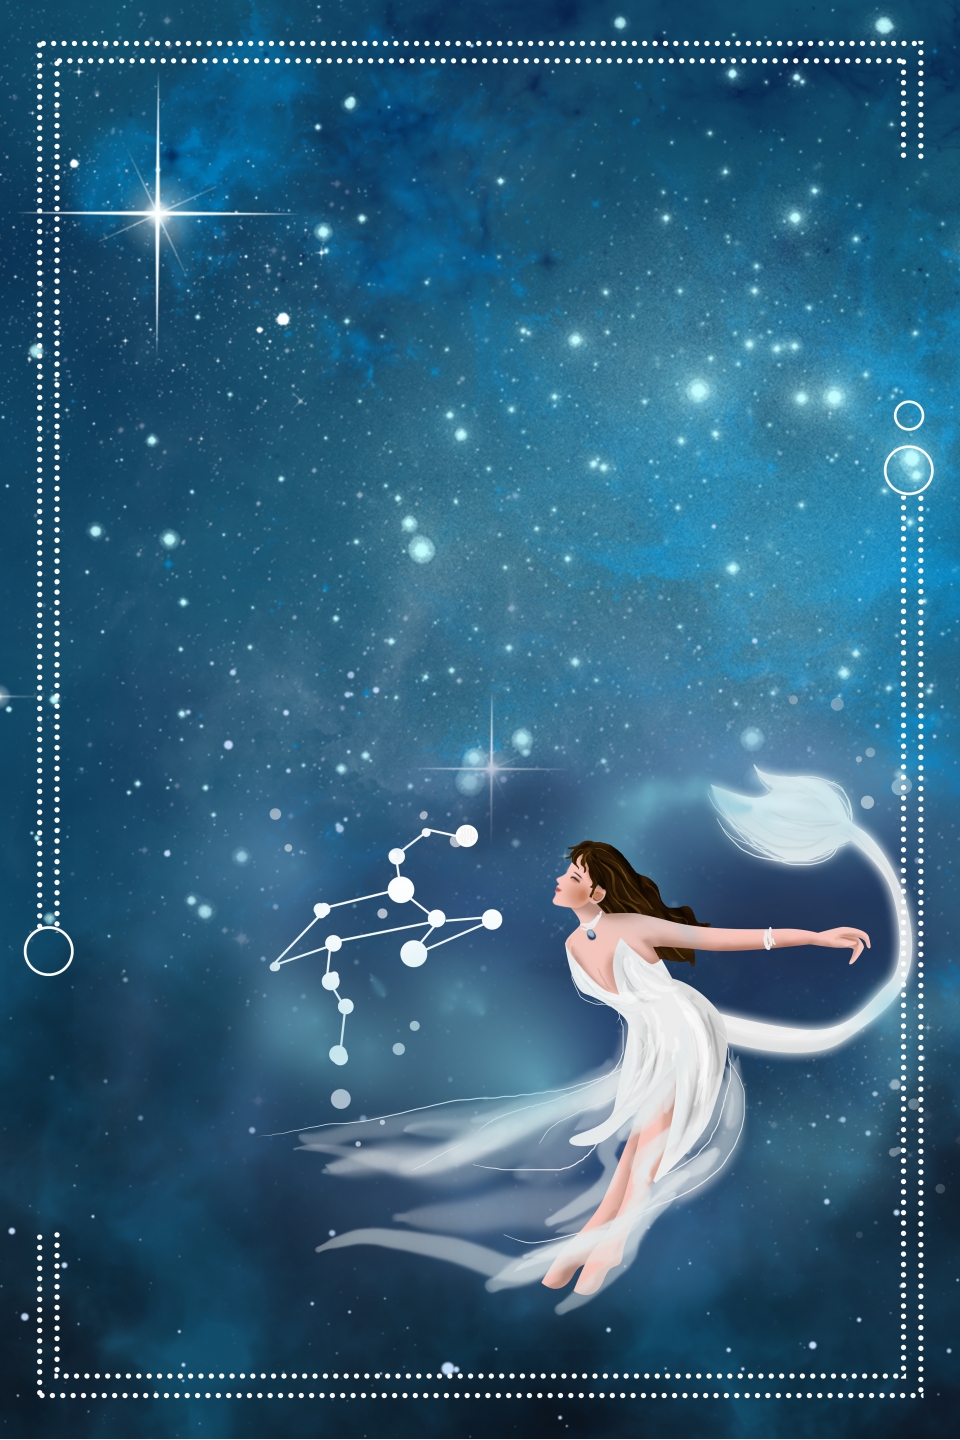 Twelve Constellations Leo Constellation Dream Material Picture, Magician, Magician, Moon Background Image for Free Download